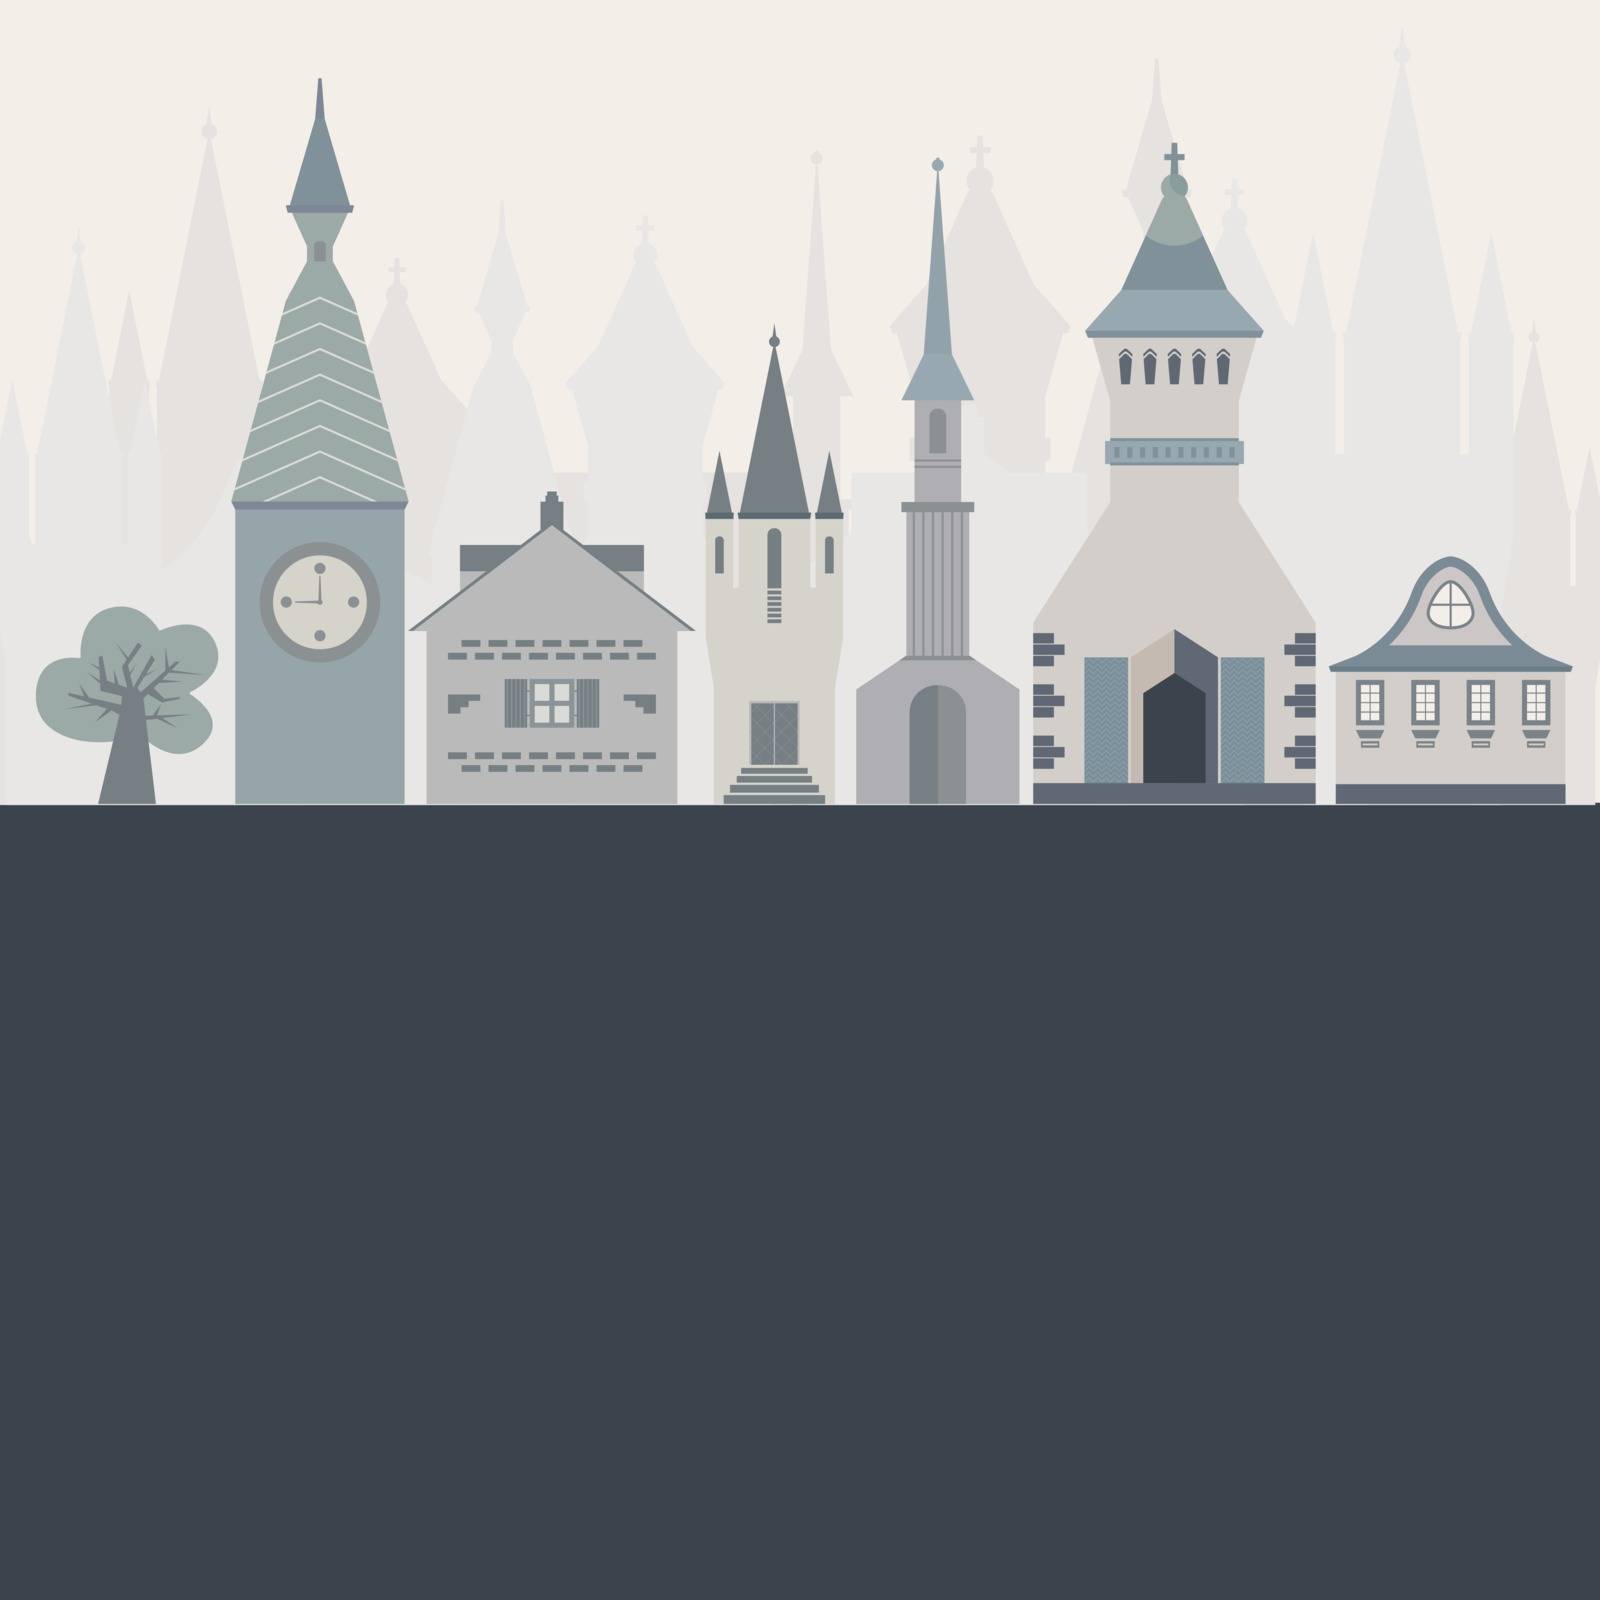 Template for an invitation or card with beautiful castles made in flat style. Vector fairytale illustration.